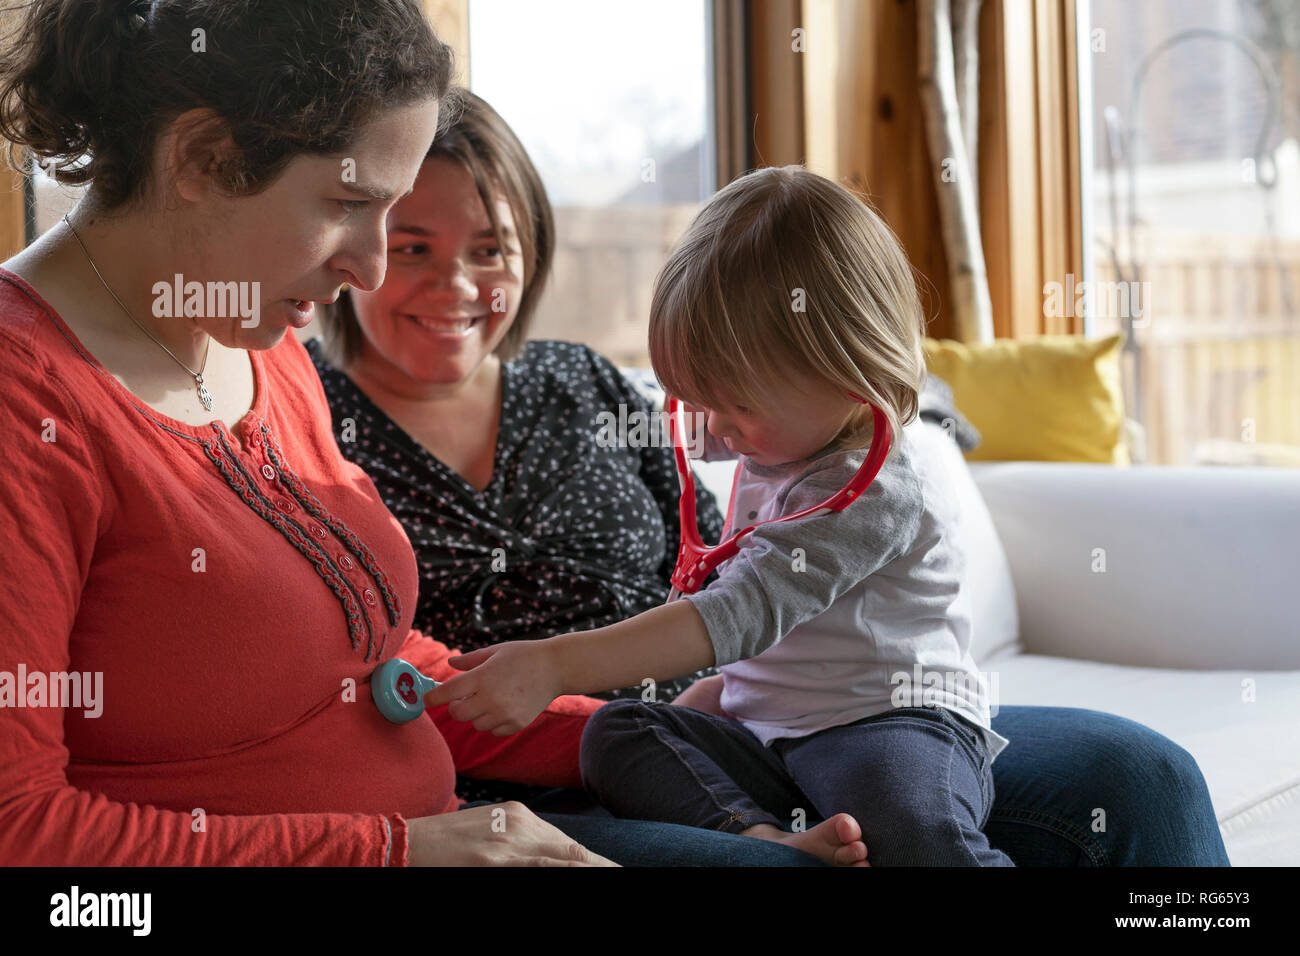 A toddler uses a stethoscope on a pregnant woman. Stock Photo